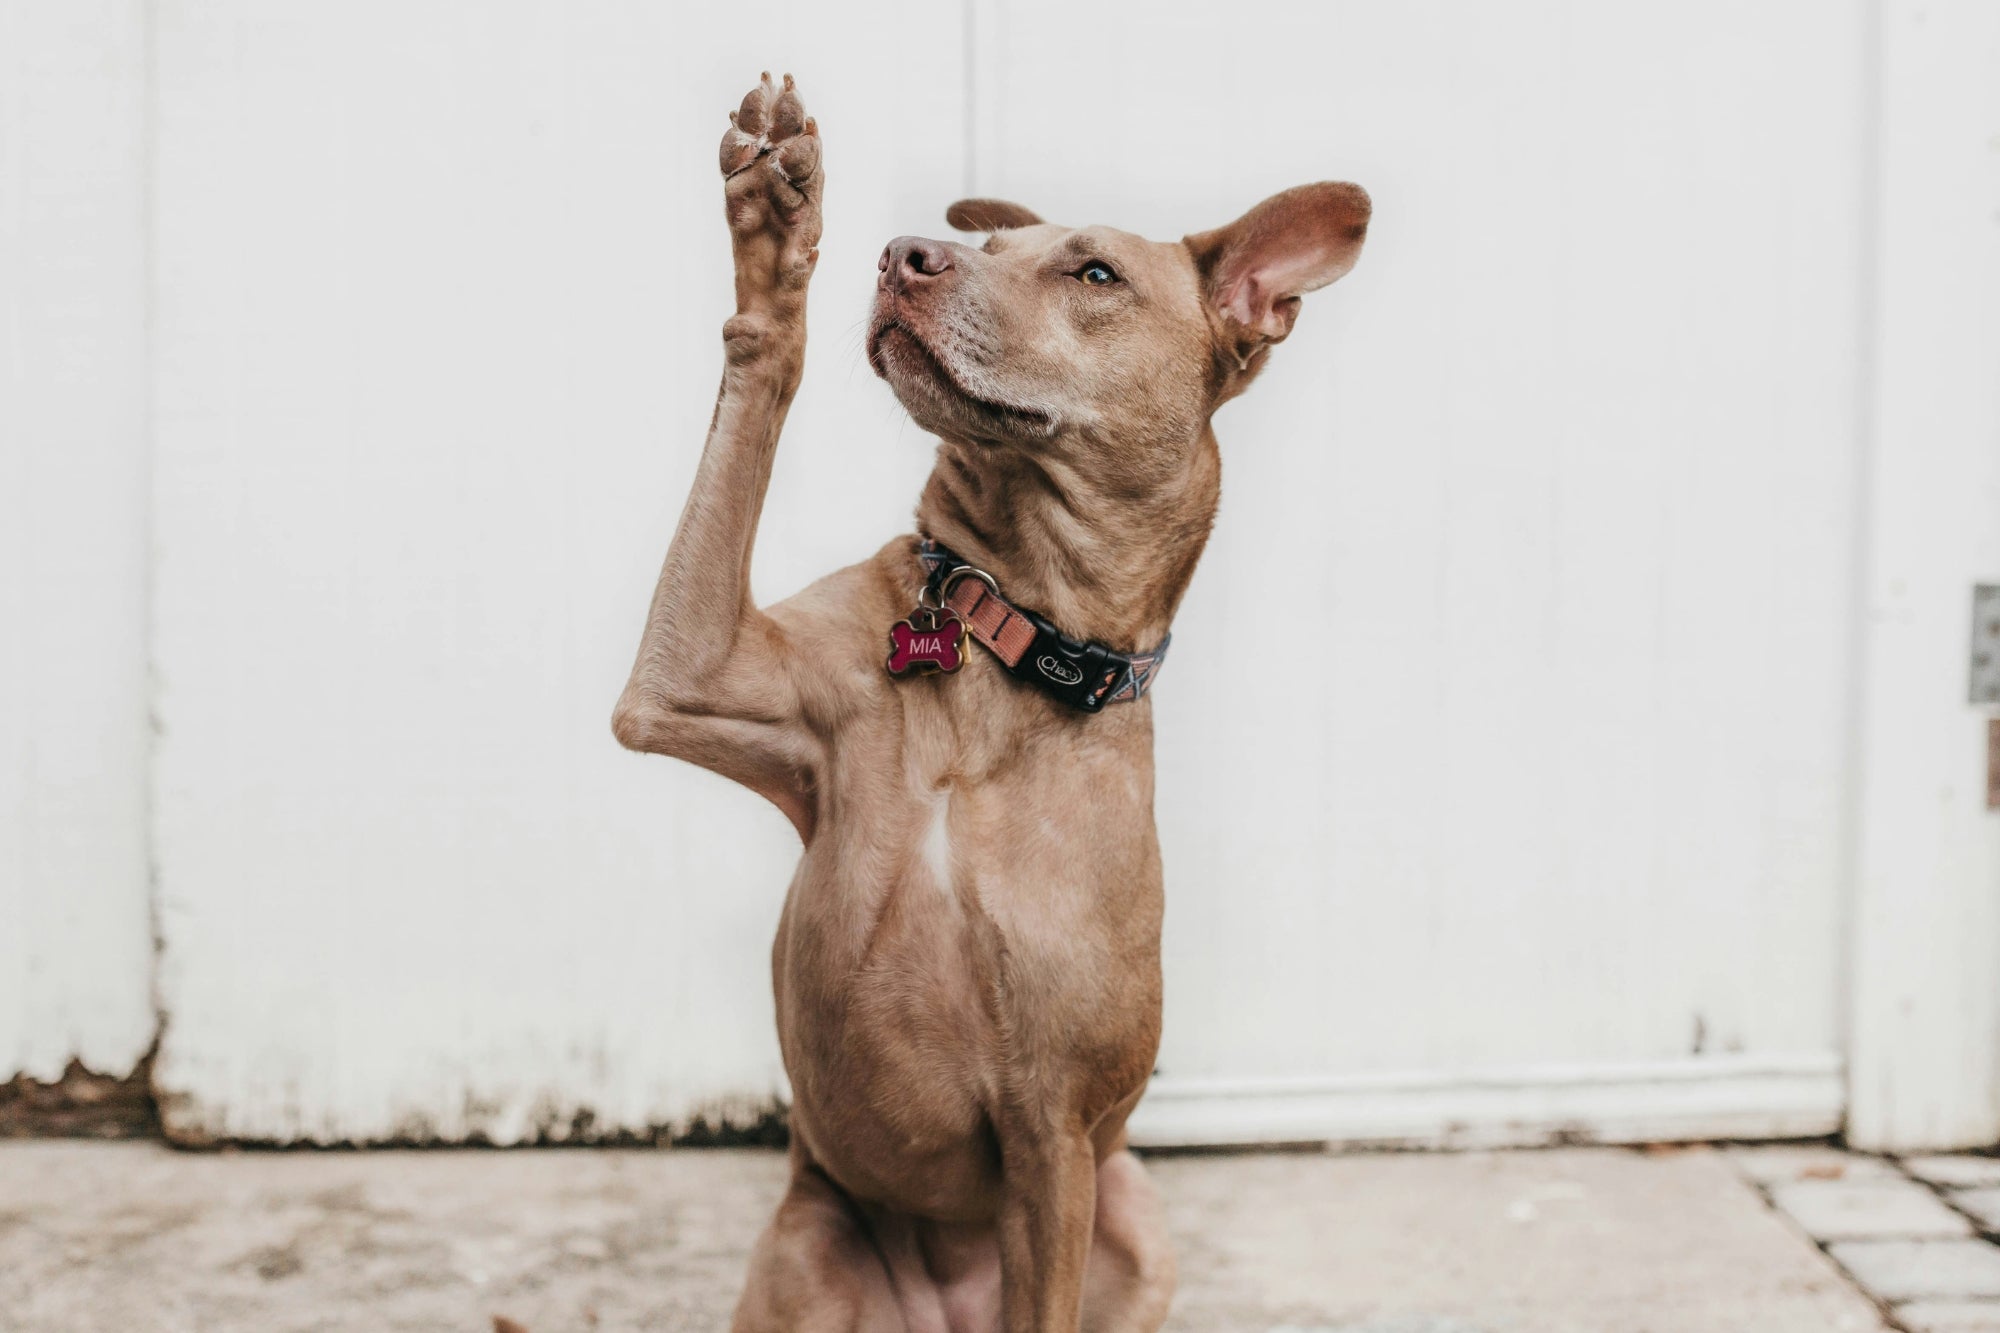 How to Train a Dog? A Guide to Successful Dog Training